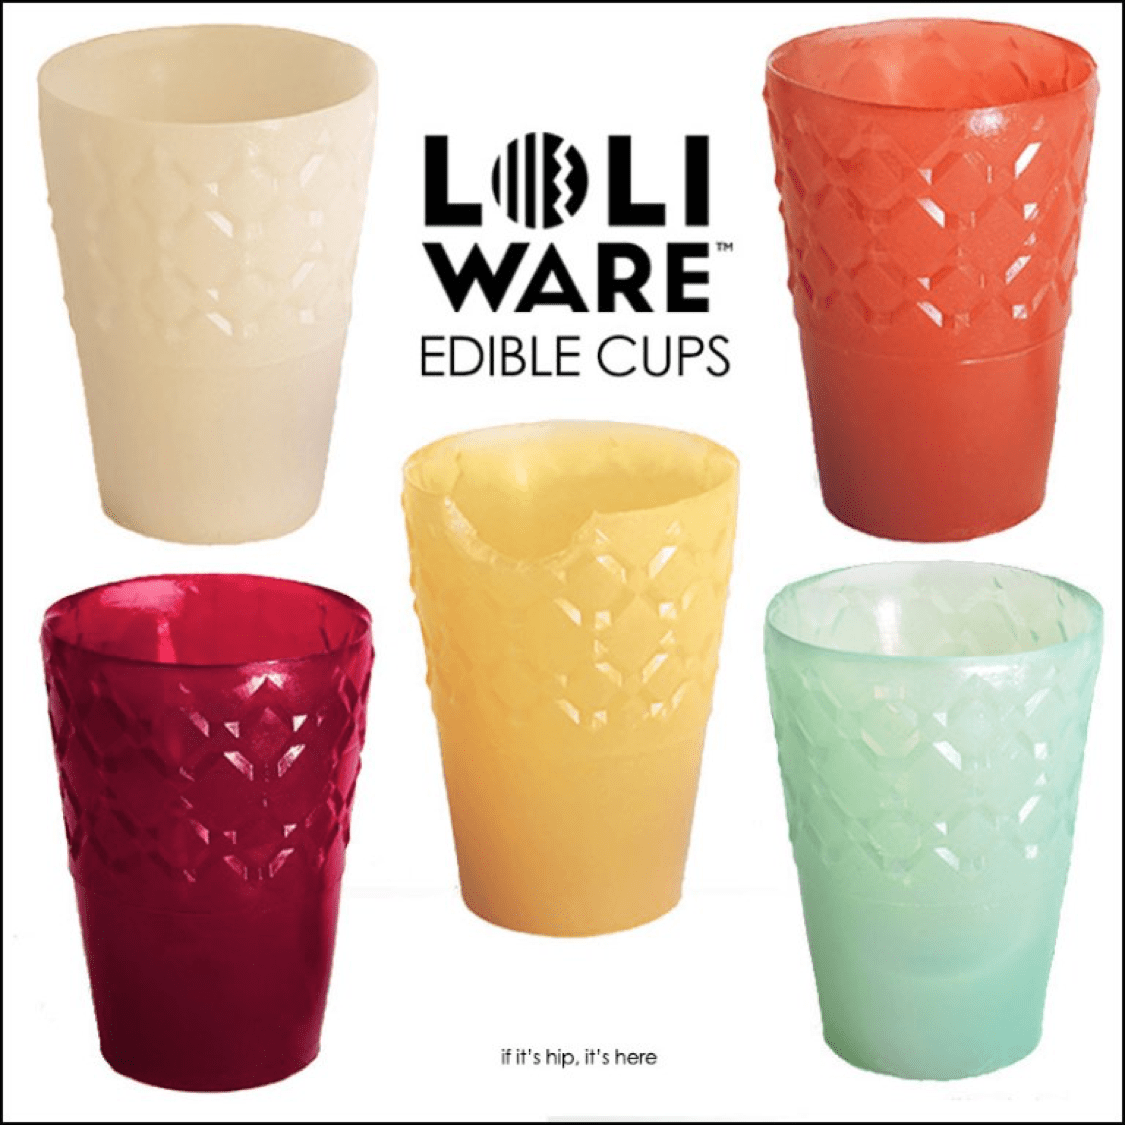 Edible cups from Loliware that were featured on the TV show, Shark Tank